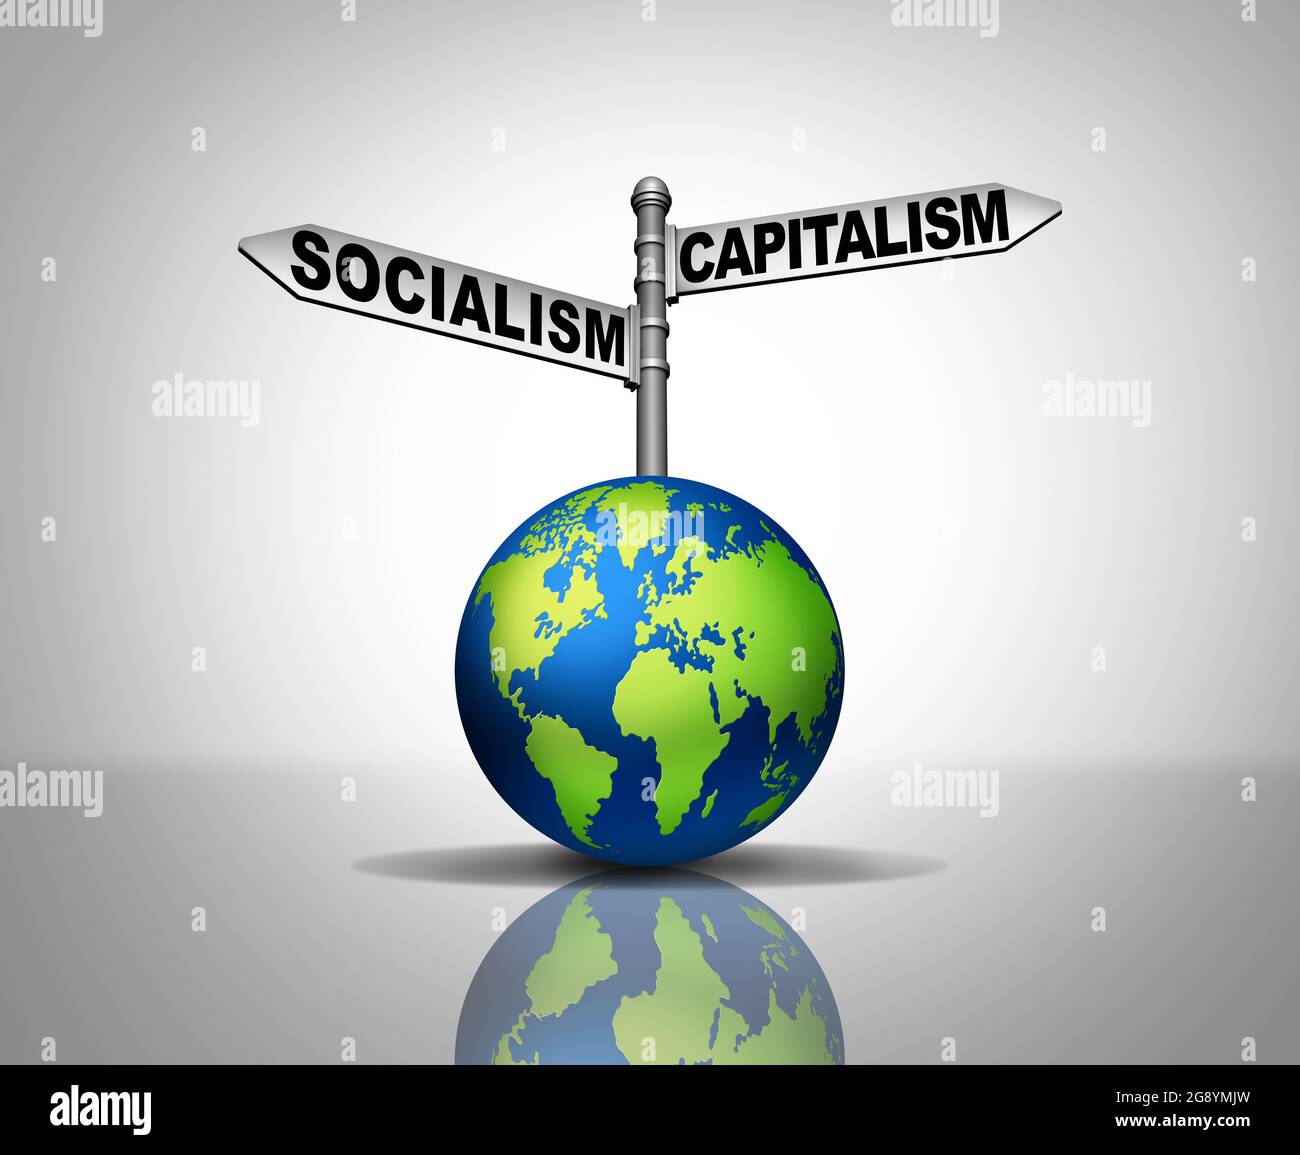 Socialism And Capitalism symbol as two different economic and political systems as a choice for global social ideology path and society. Stock Photo